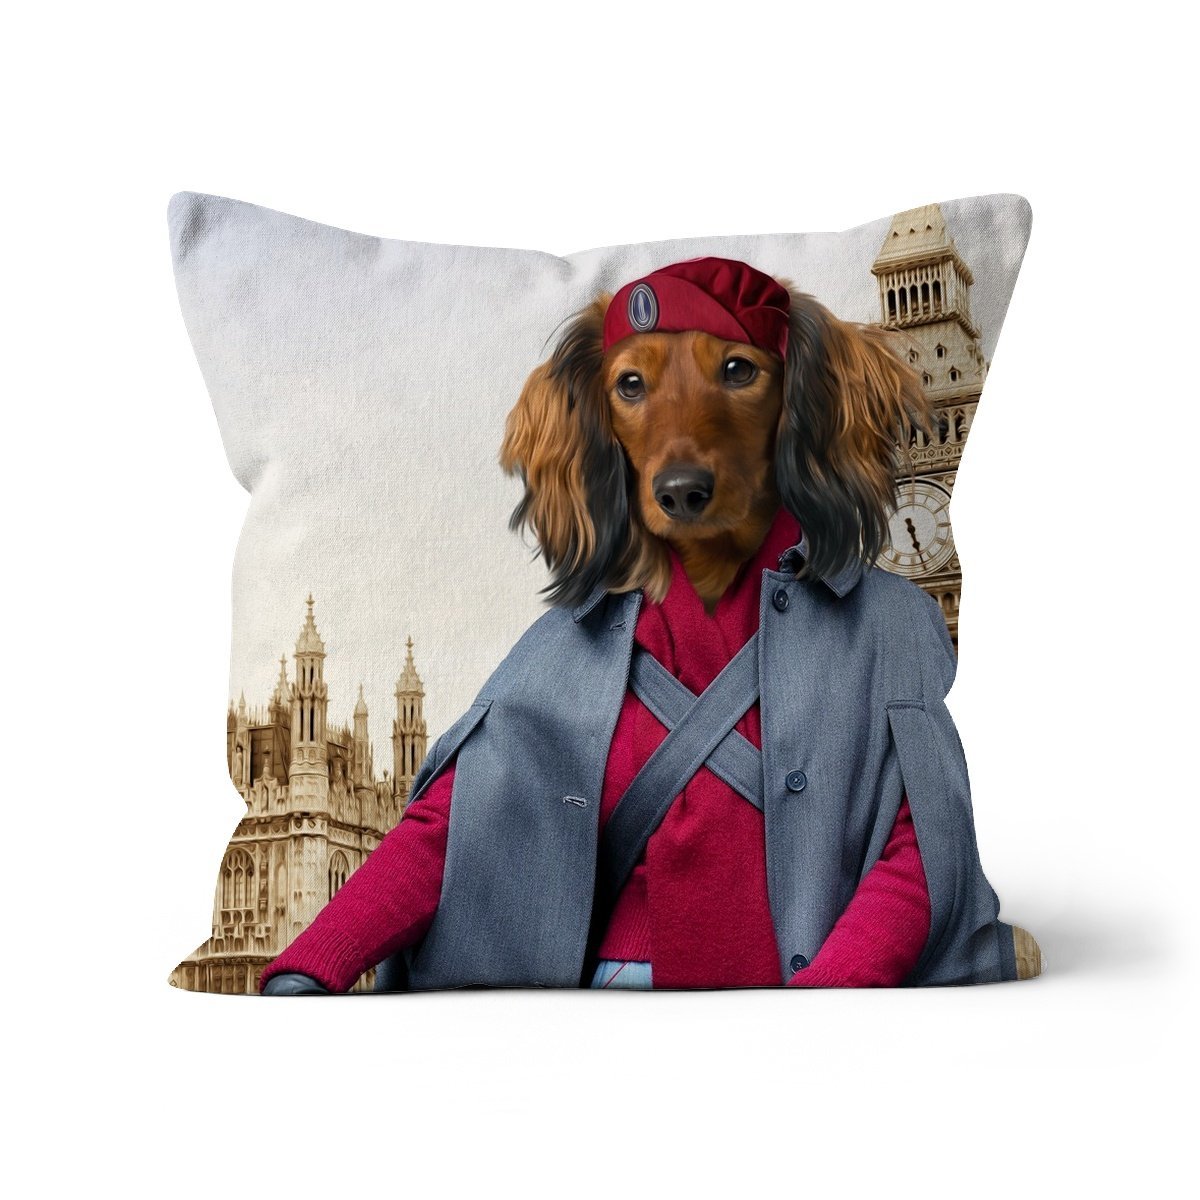 The Midwife (Call The Midwife Inspired): Custom Pet Cushion - Paw & Glory - #pet portraits# - #dog portraits# - #pet portraits uk#pawandglory, pet art pillow,custom pillow of your pet, pet pillow, custom cat pillows, photo pet pillow, dog memory pillow